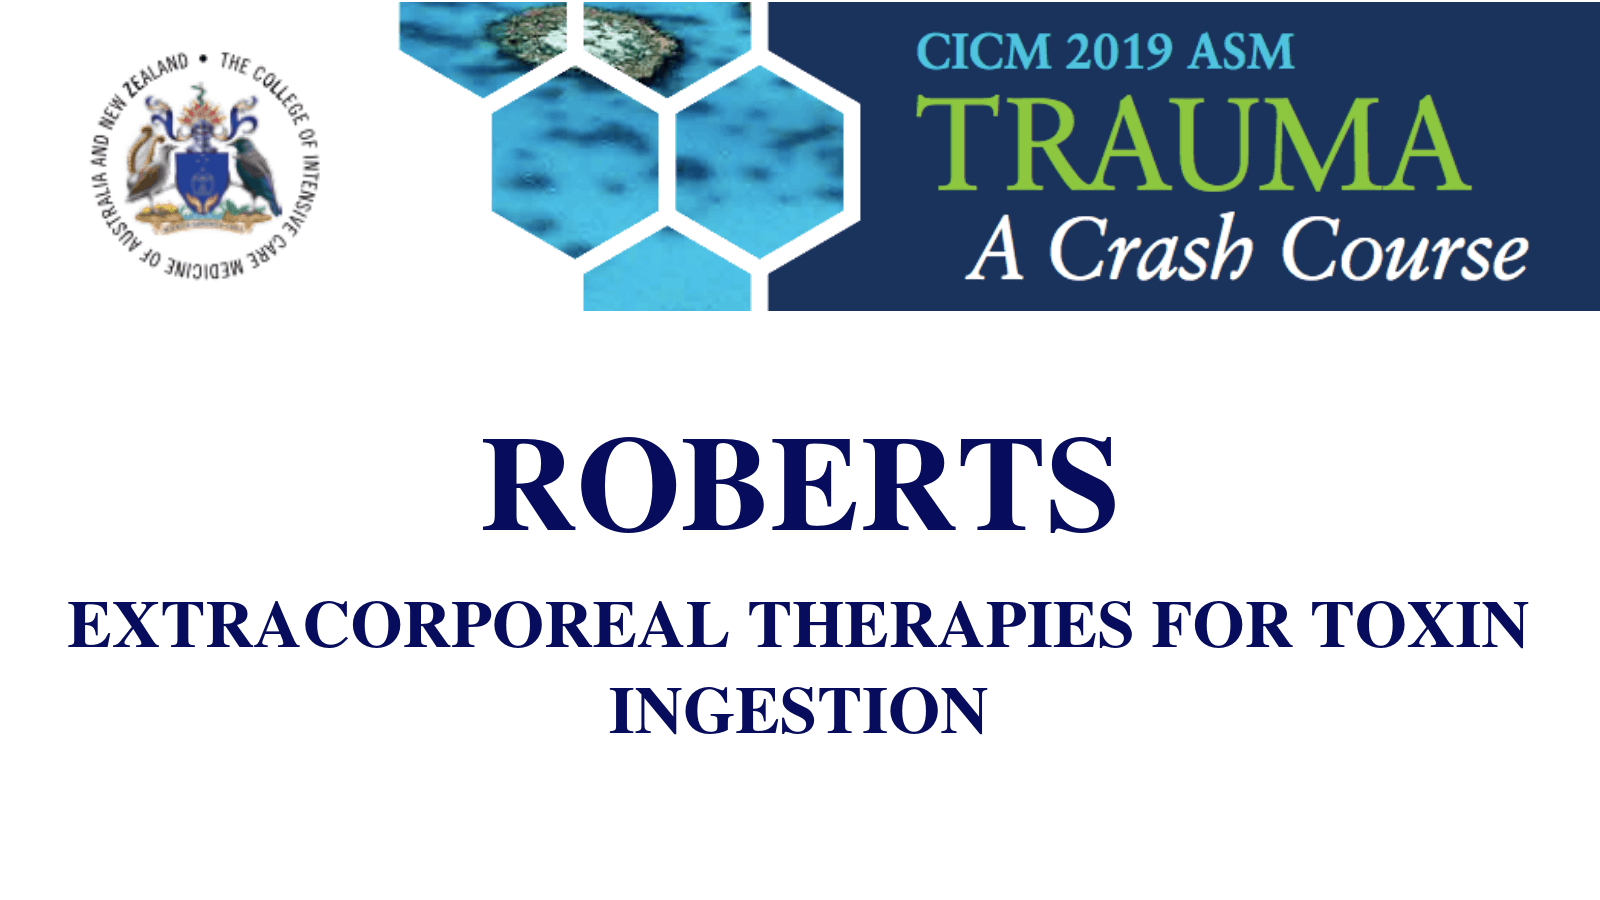 Extracorporeal therapies for toxin ingestion